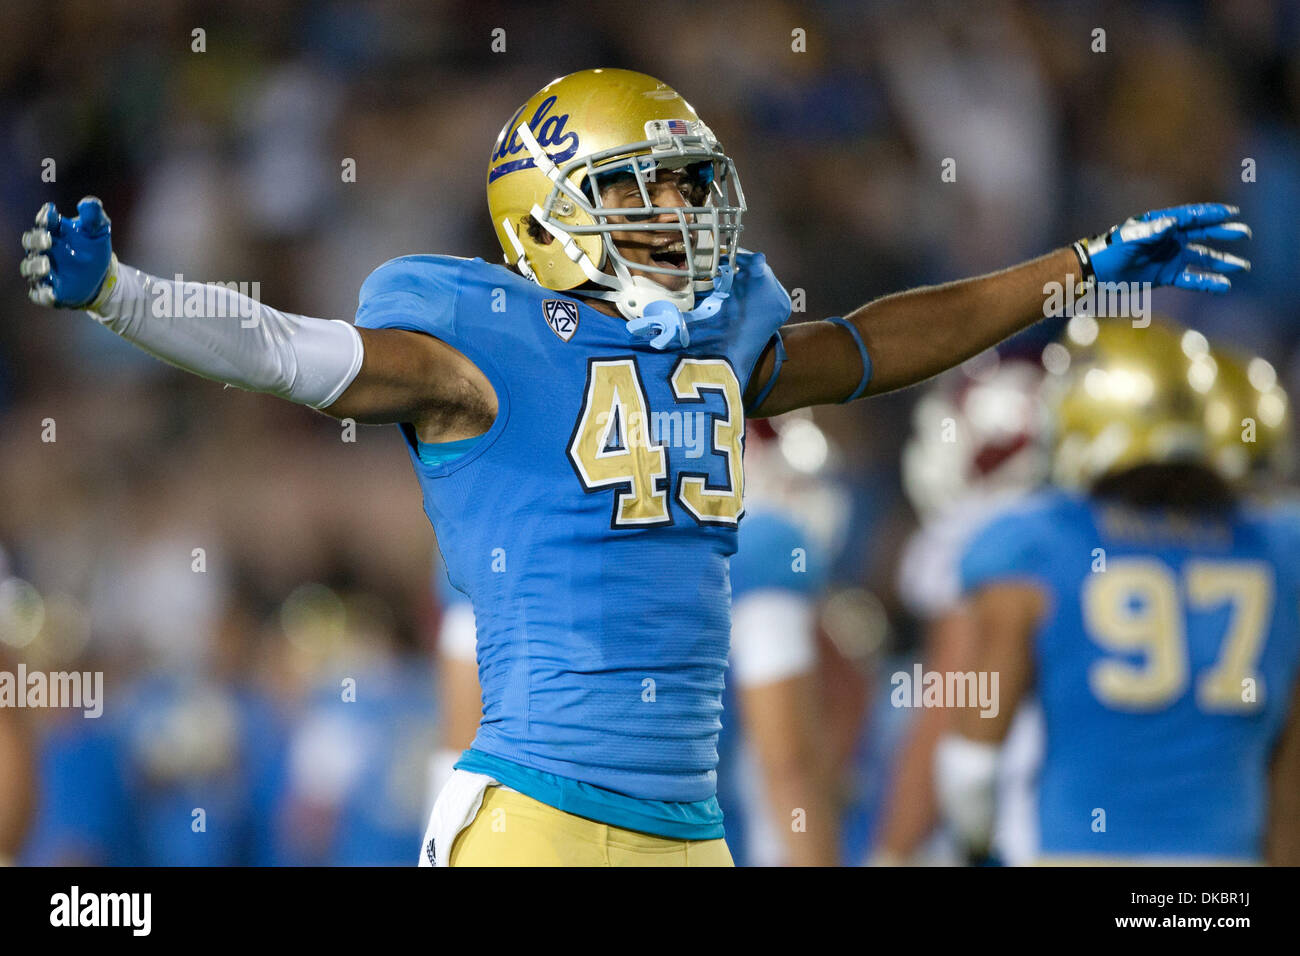 Oct. 8, 2011 - Pasadena, California, U.S - UCLA Bruins safety Dietrich Riley #43 gets pumped up during the NCAA Football game between the Washington State Cougars and the UCLA Bruins at the Rose Bowl. (Credit Image: © Brandon Parry/Southcreek/ZUMAPRESS.com) Stock Photo